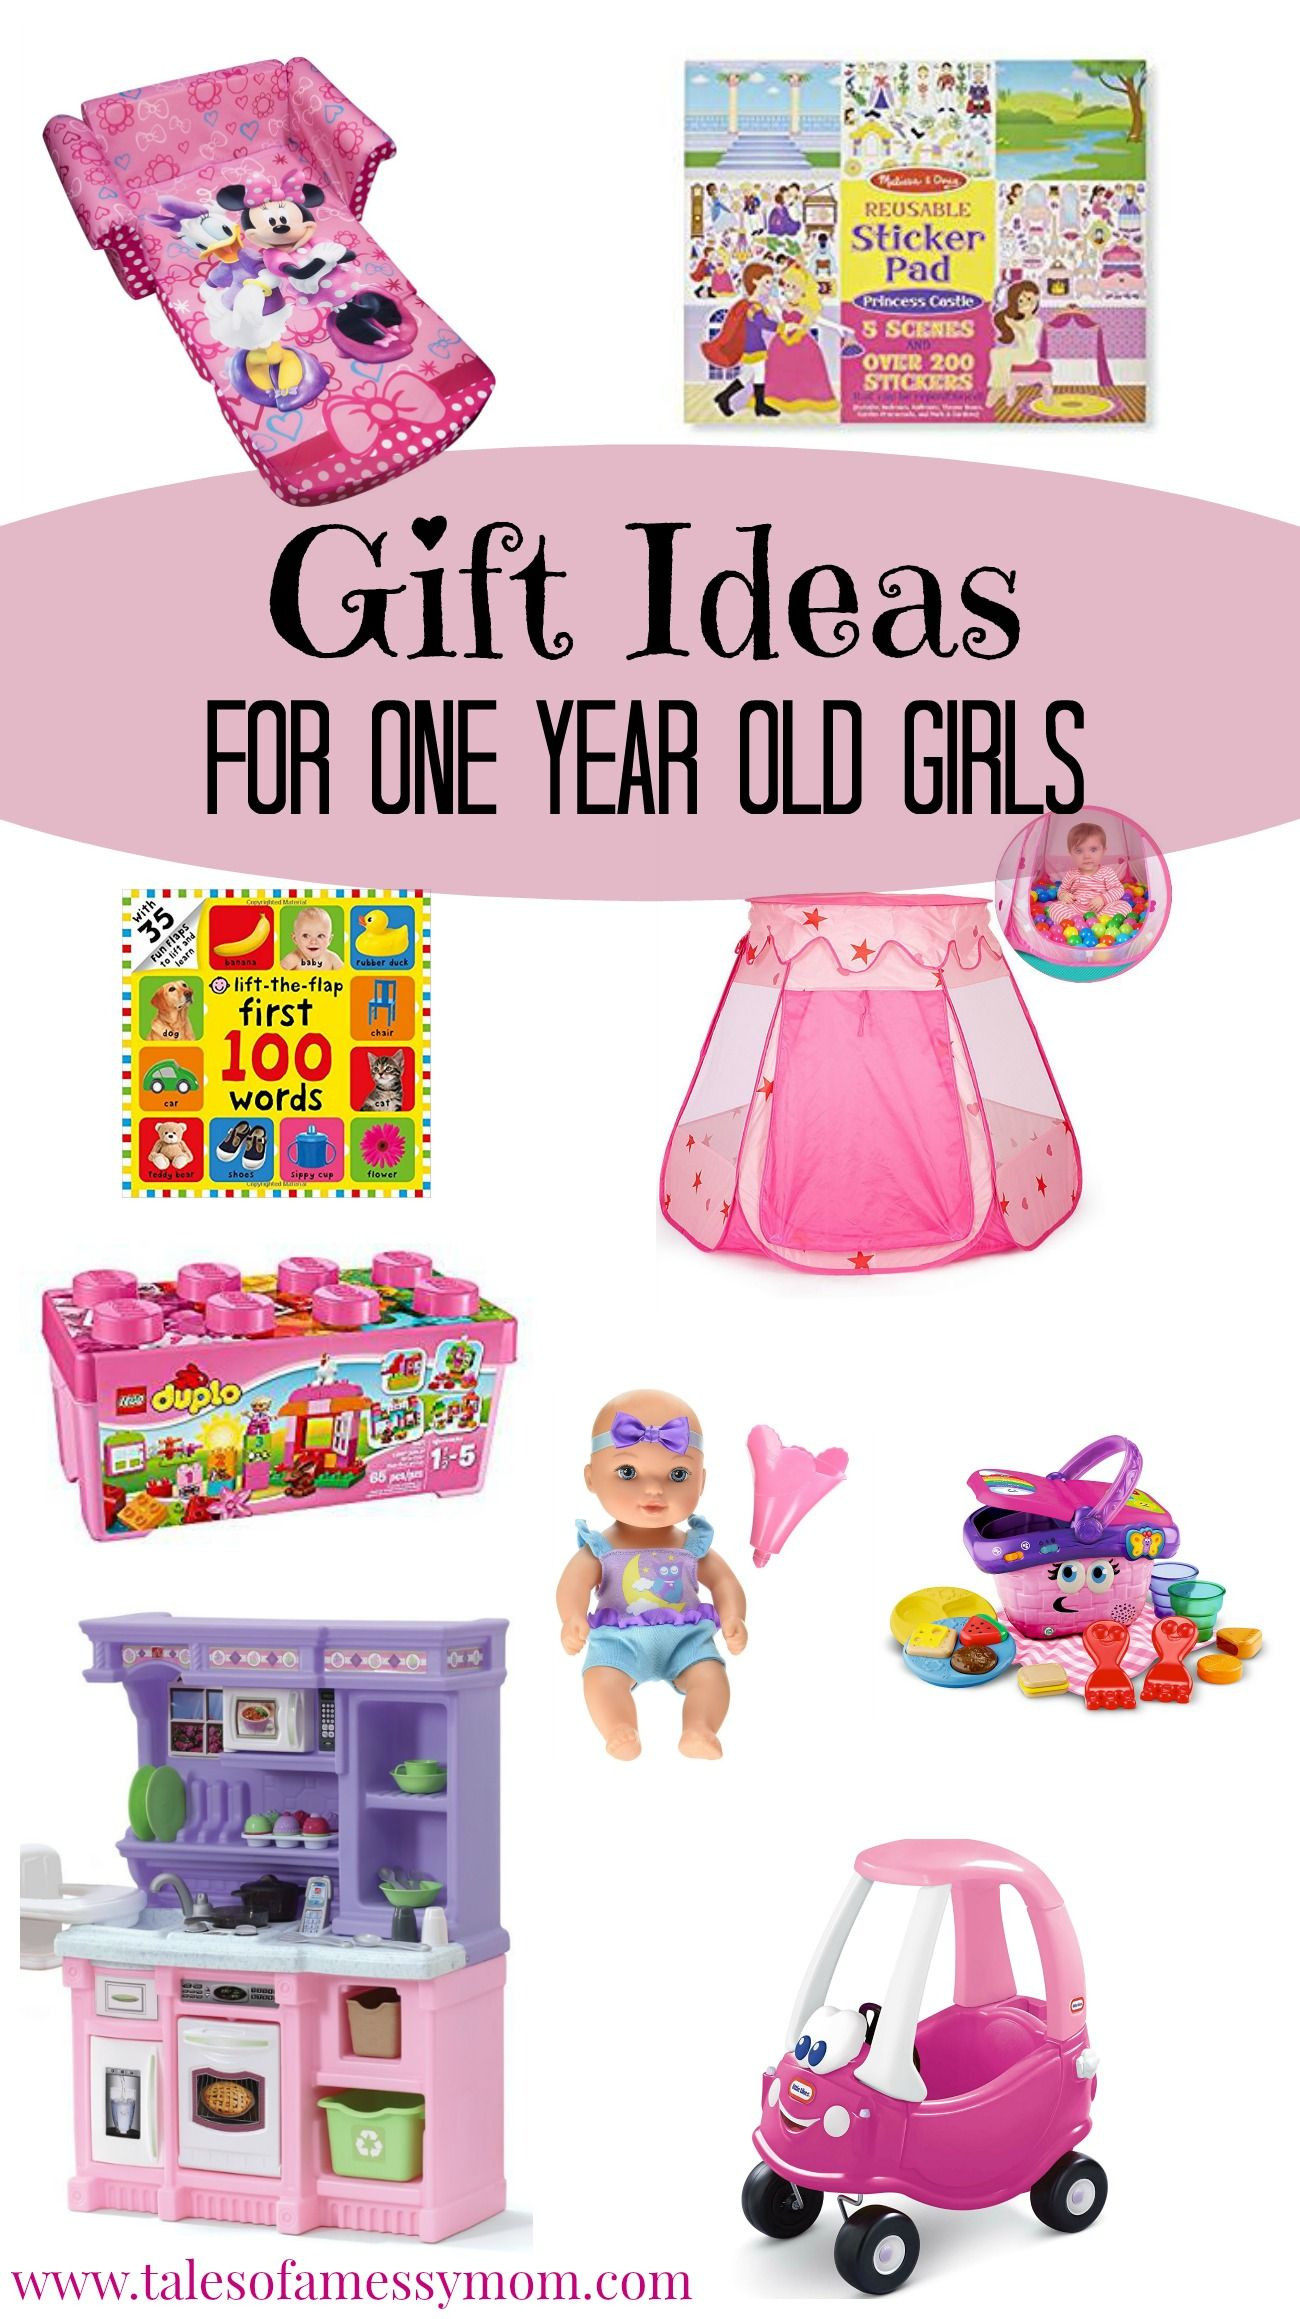 Birthday Gifts For A 1 Year Old
 Gift Ideas for e Year Old Girls